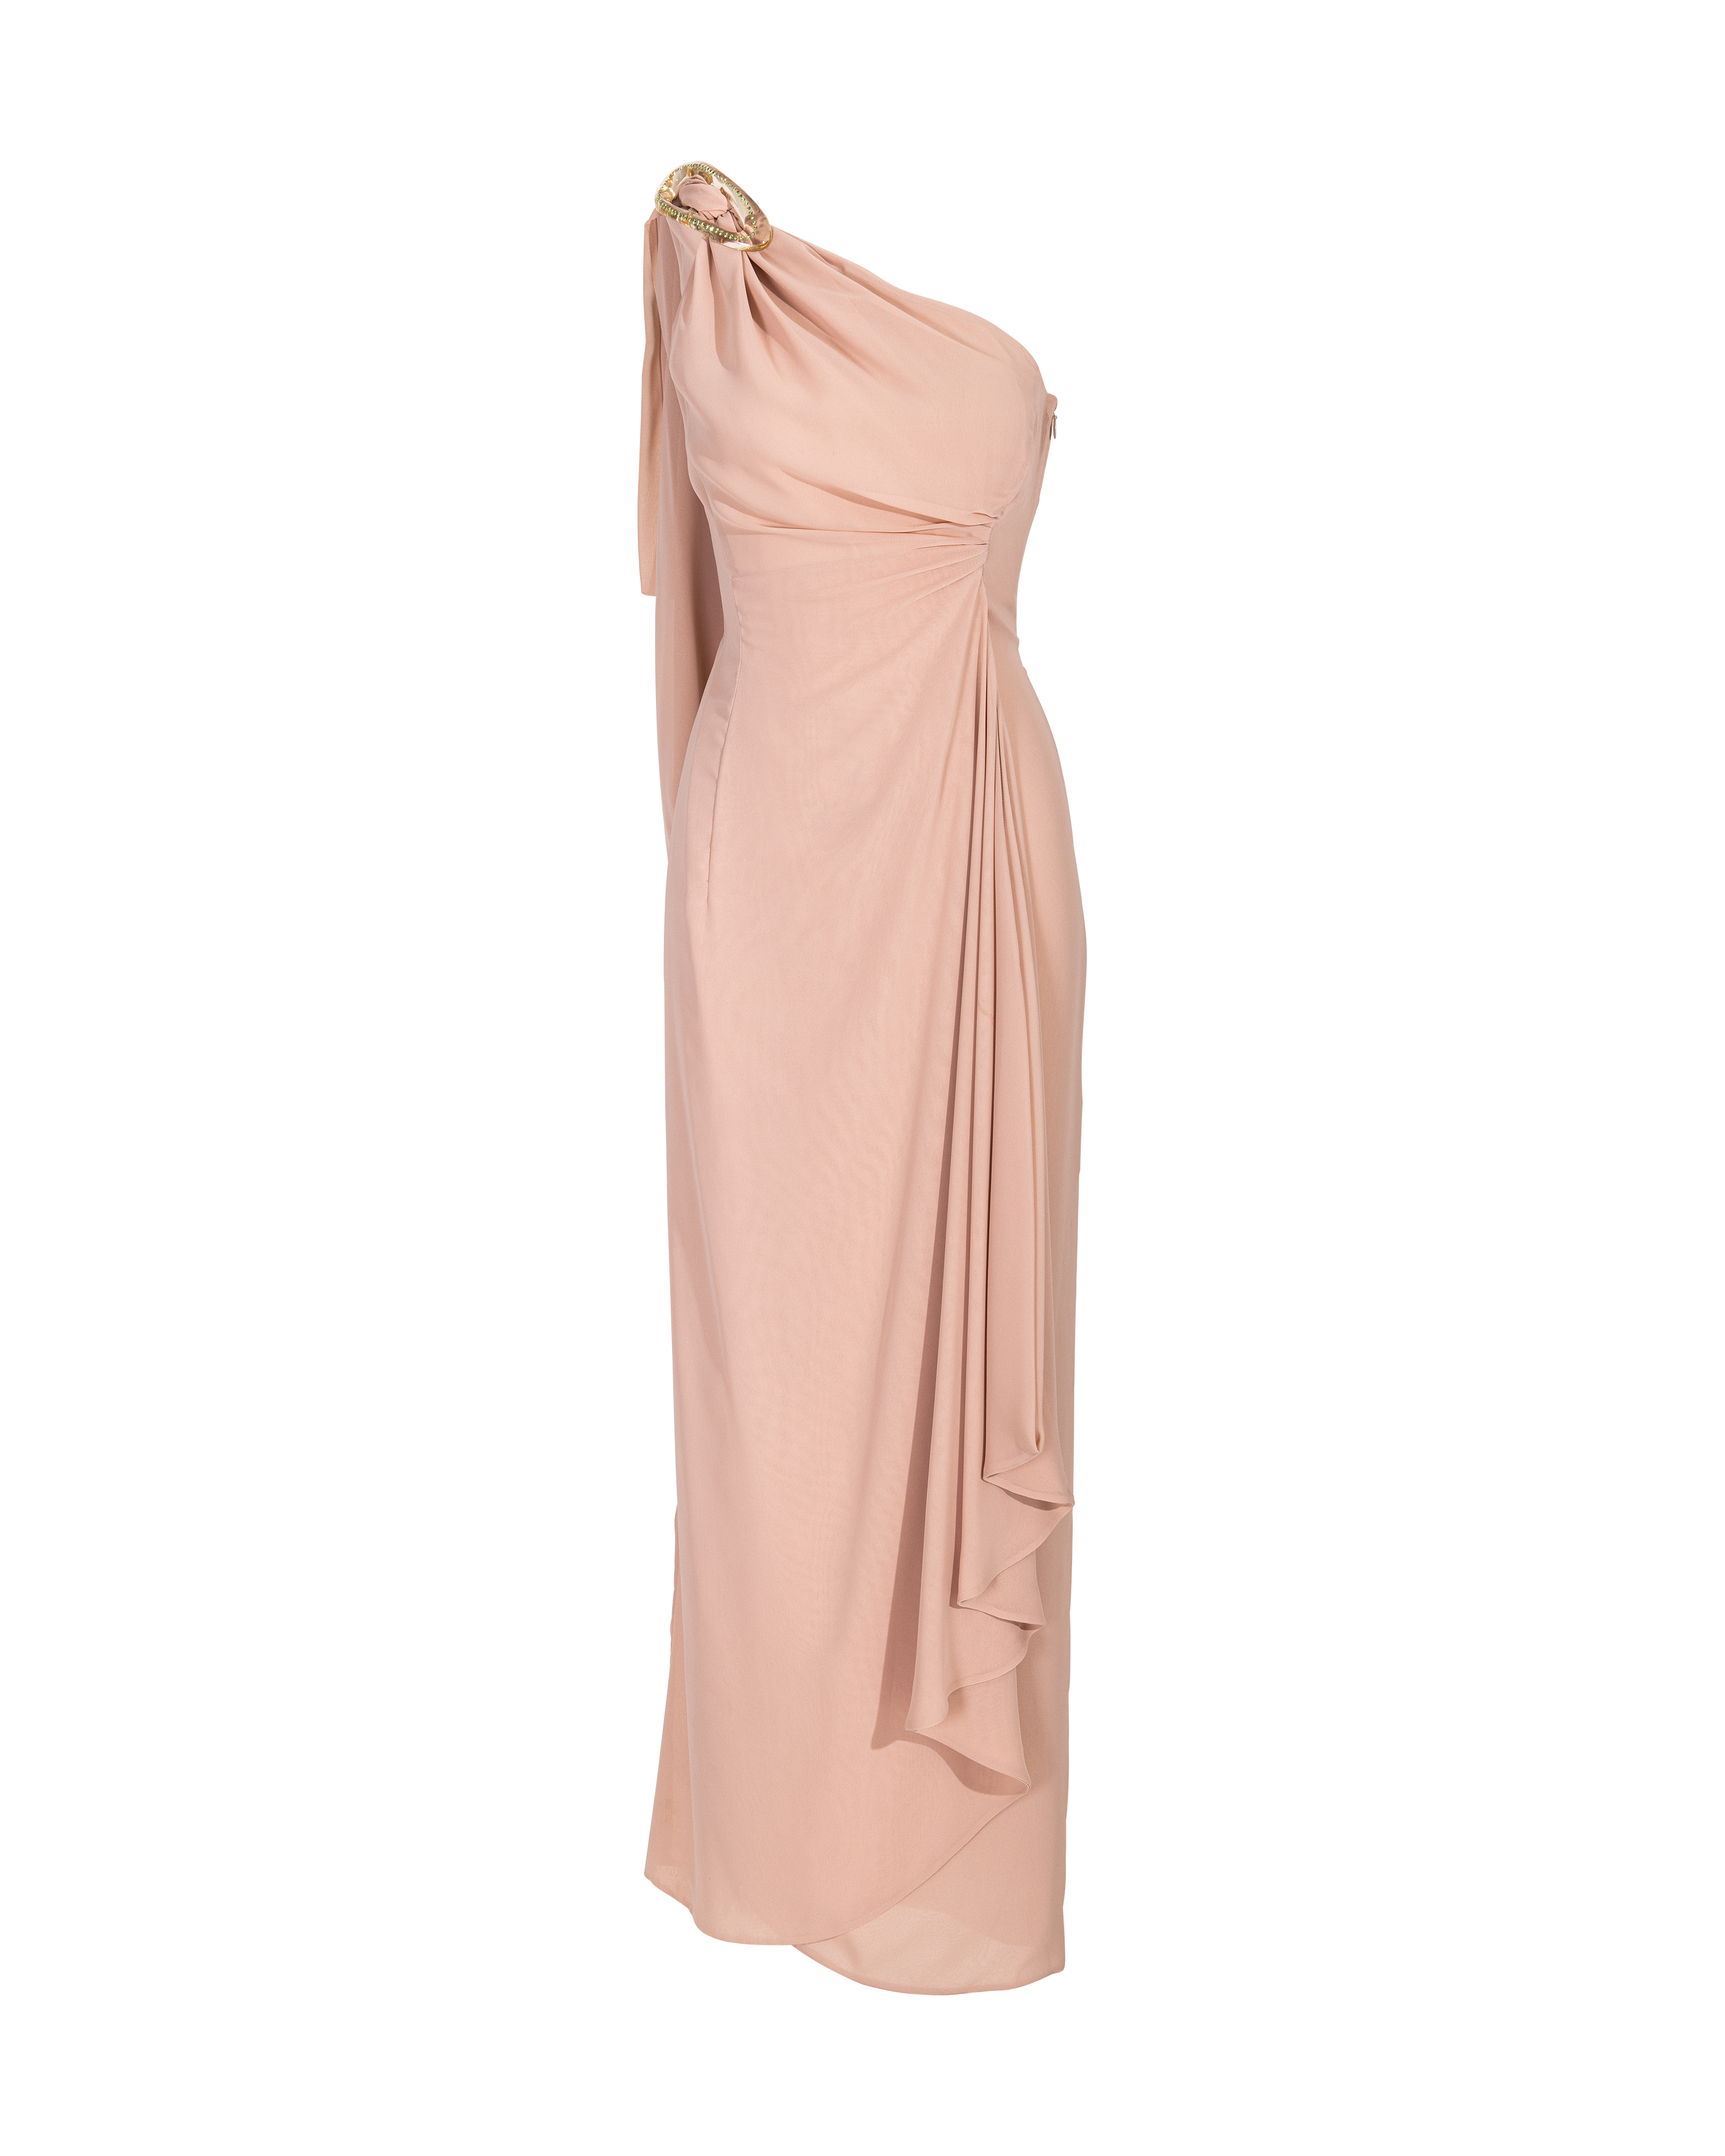 S/S 2000 Peach-Pink One-Shoulder Drape Gown and Stole